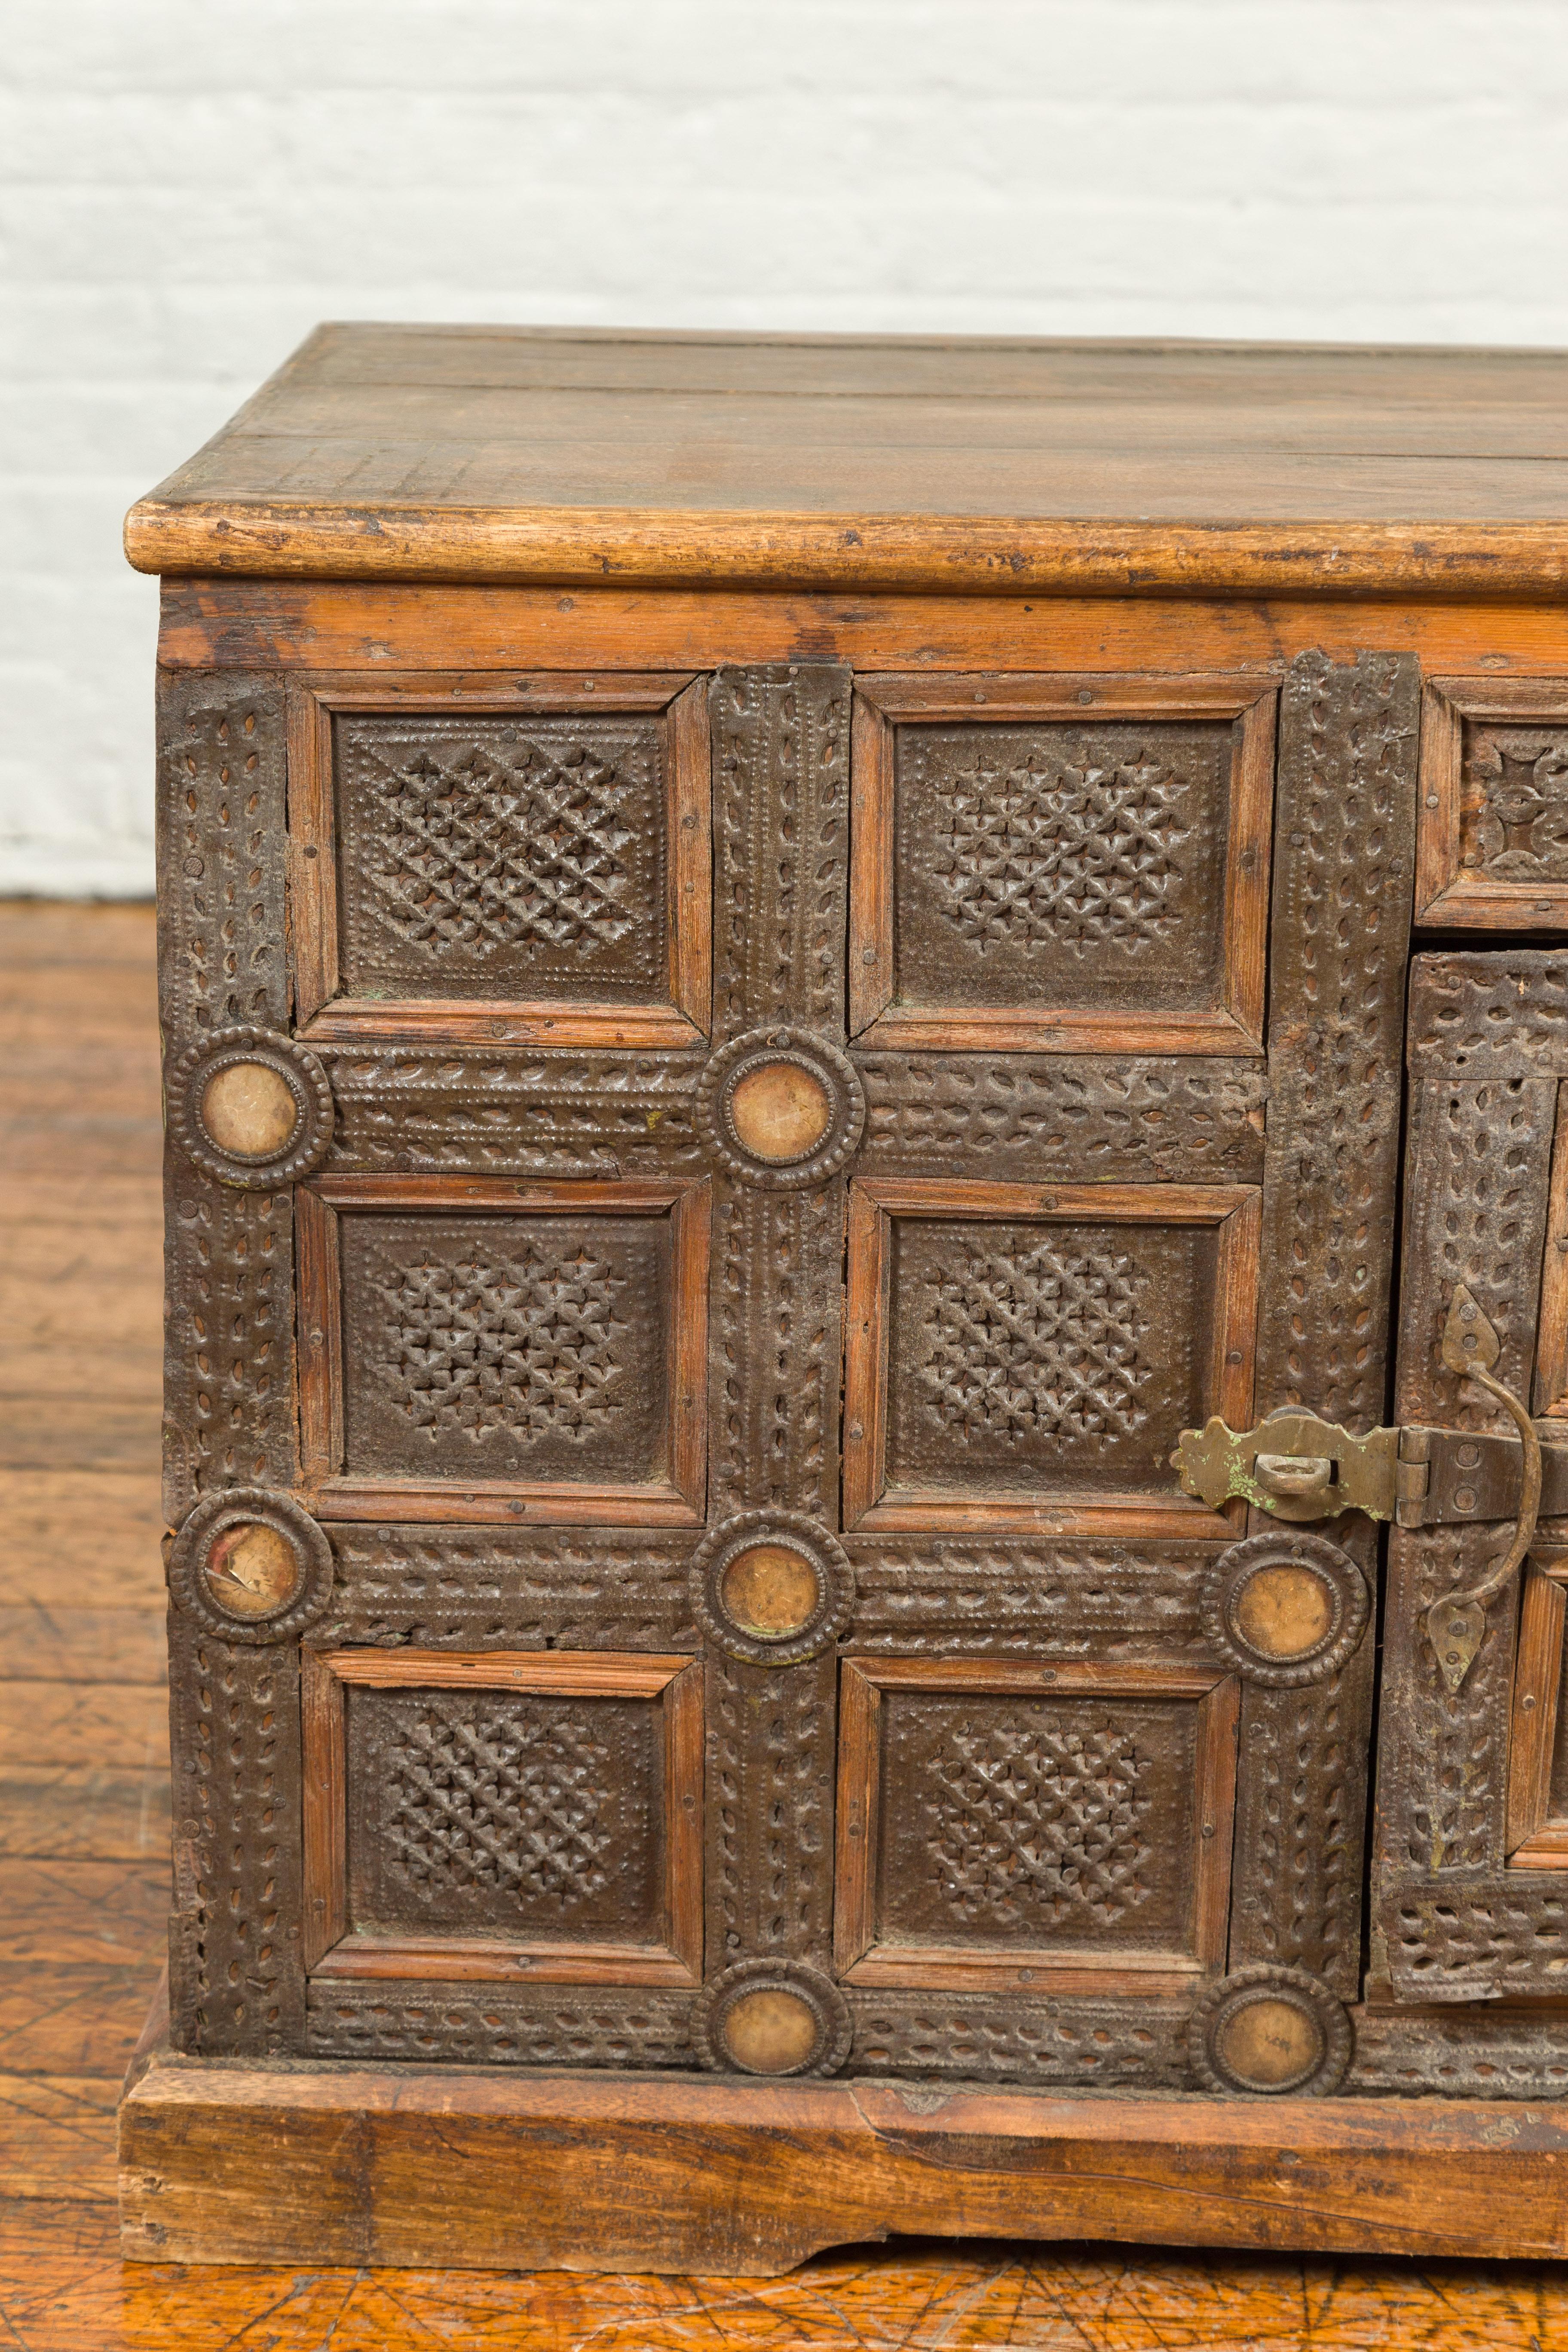 Indian Vintage Wood and Metal Cabinet with Geometric Decor 1